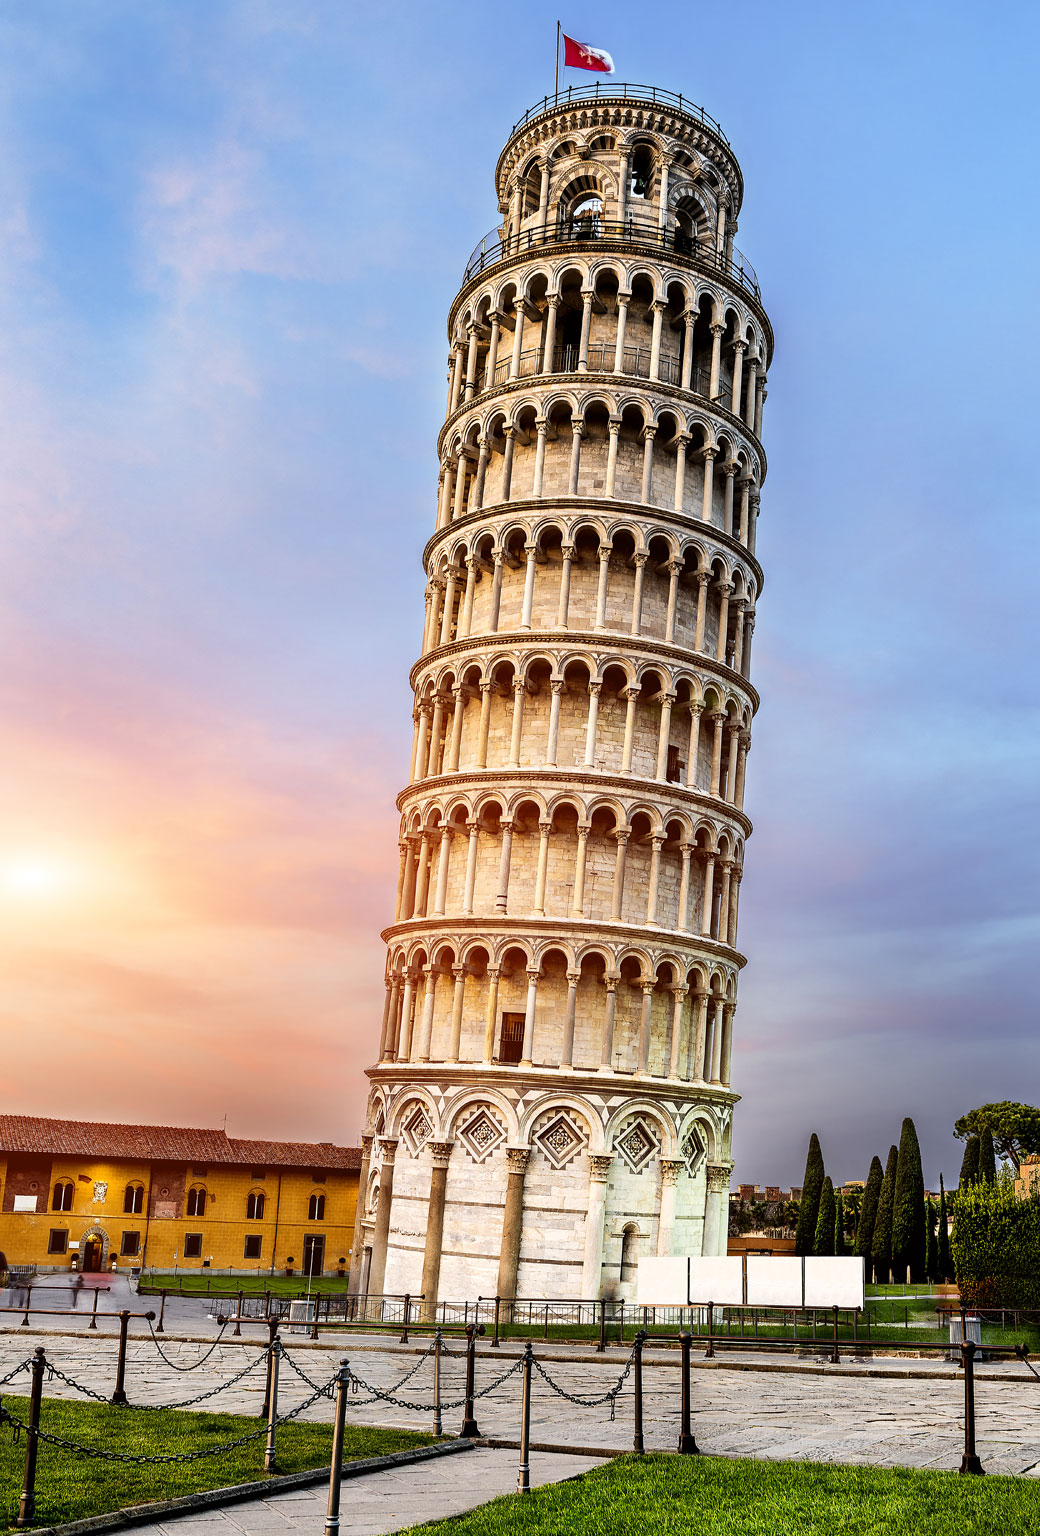 Parallax Wallpaper The Leaning Tower Of Pisa HD